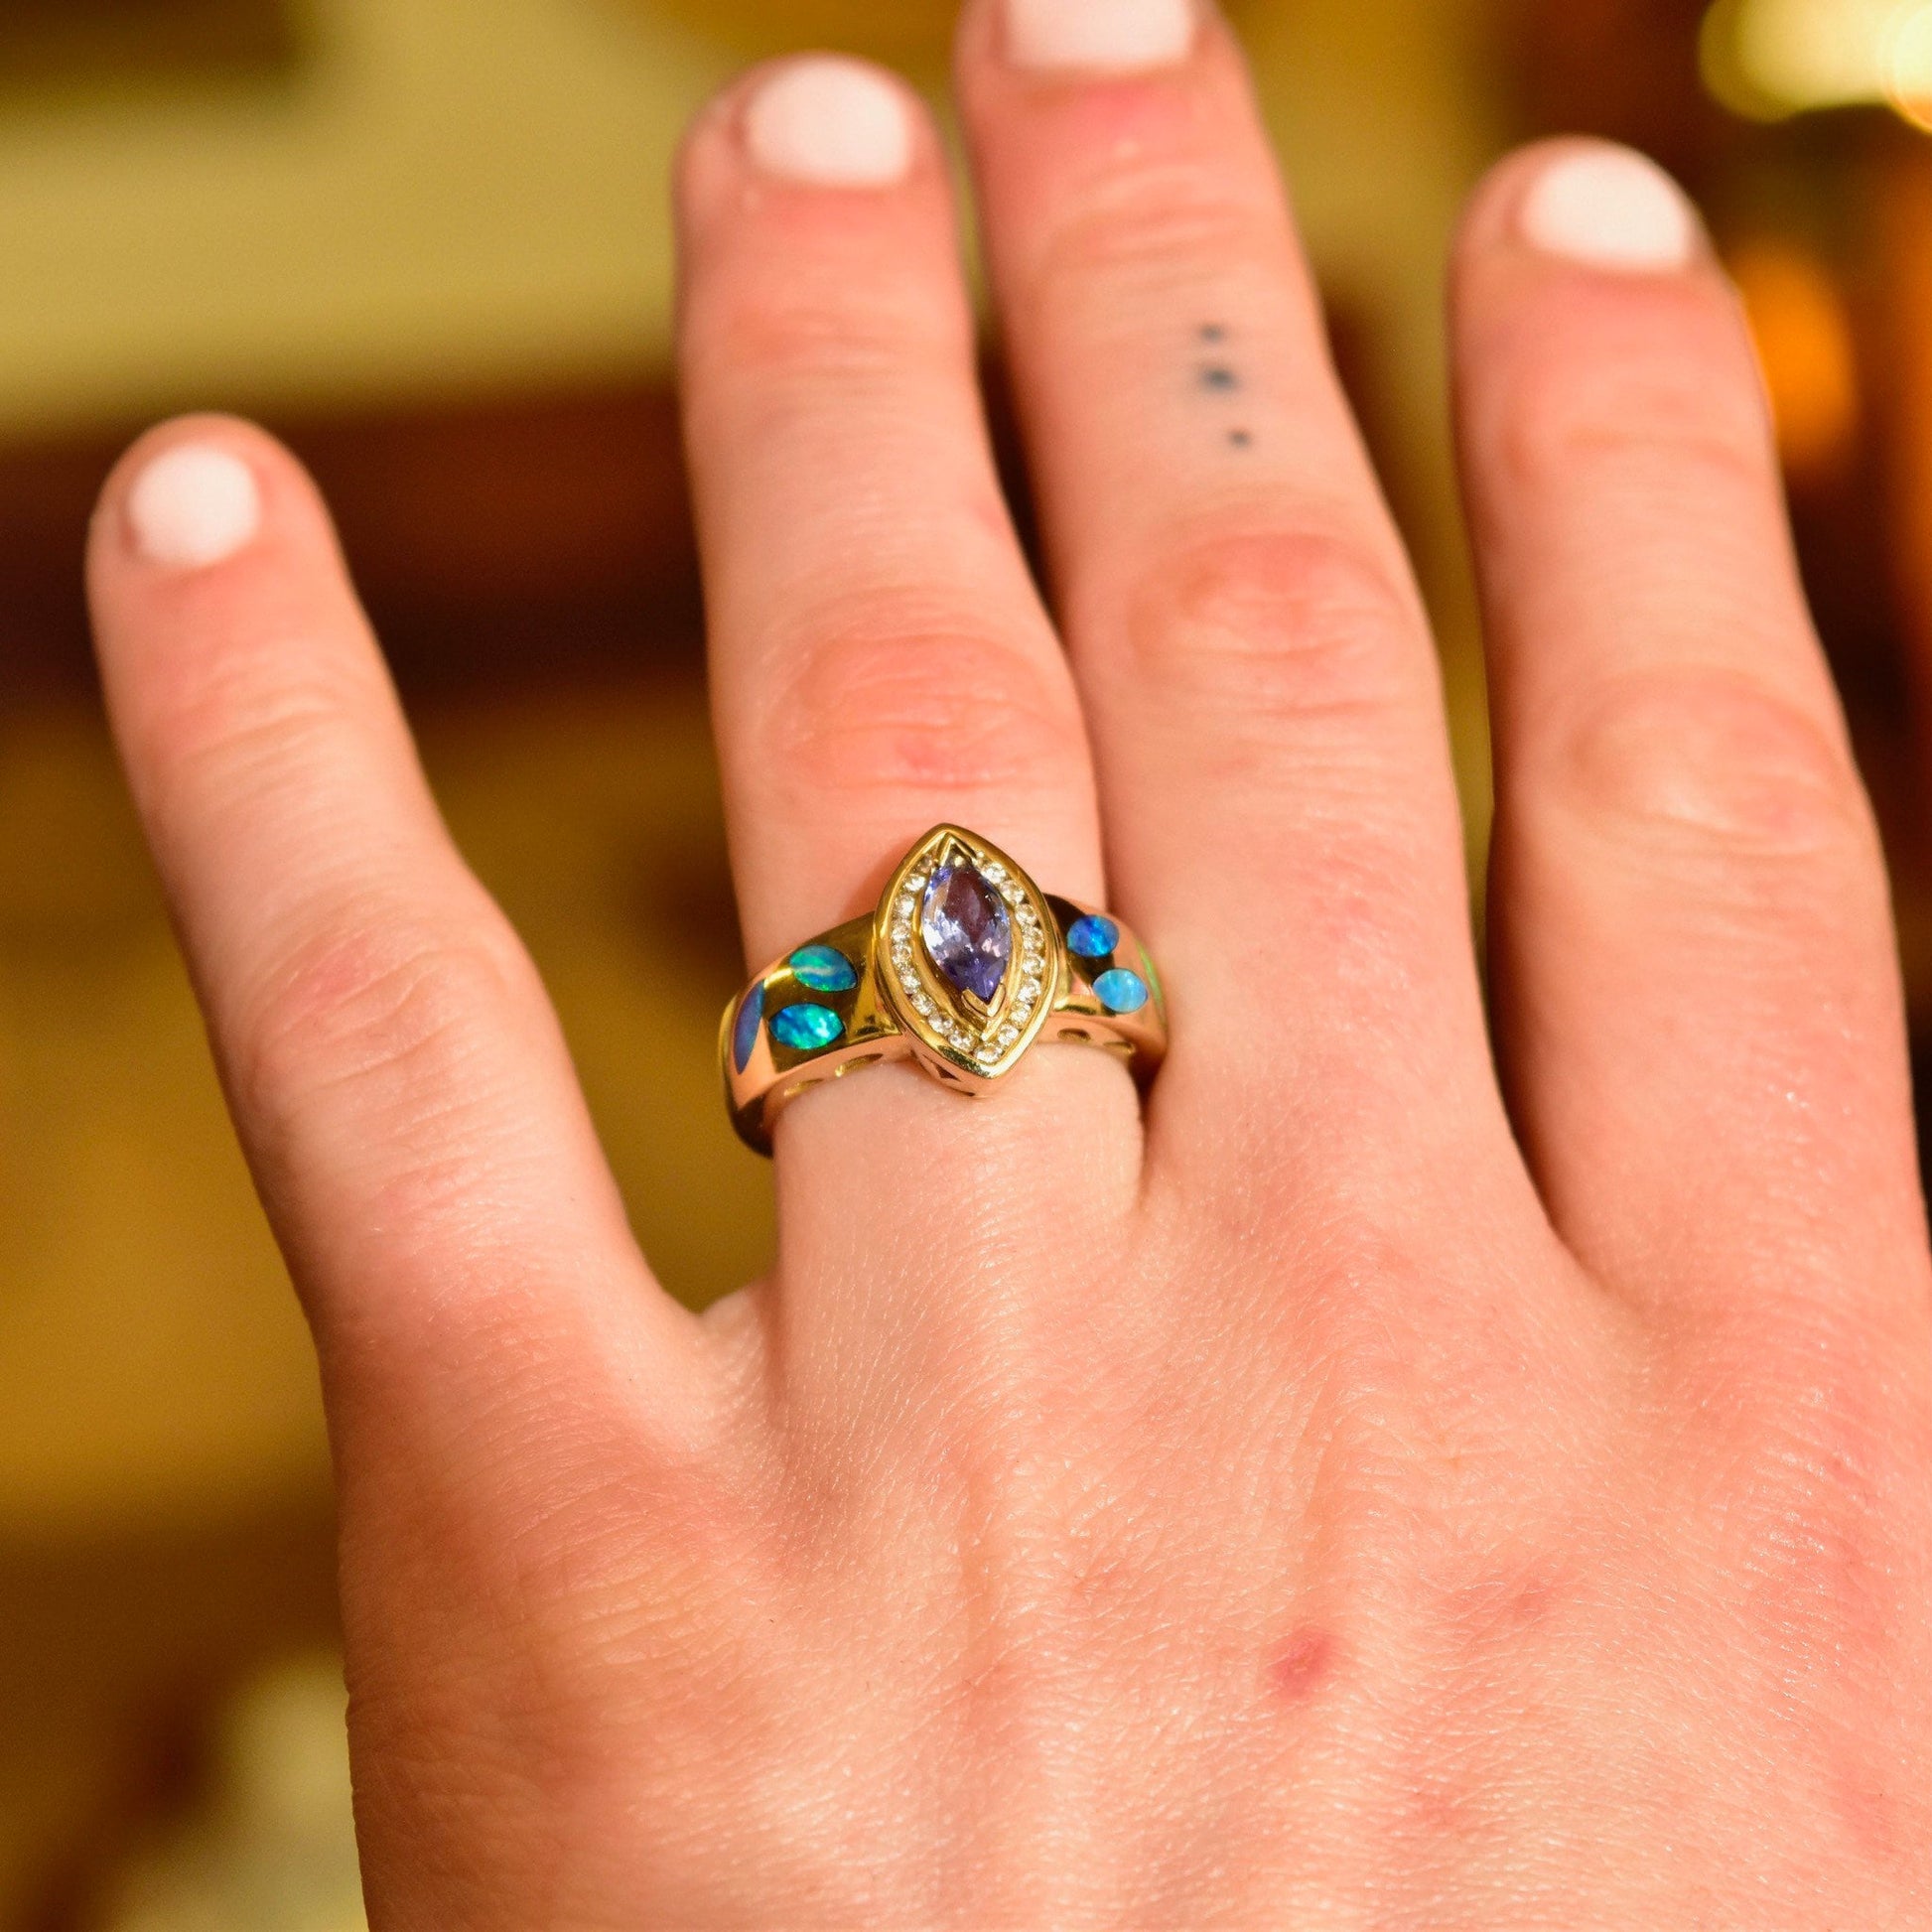 14K gold marquise-cut tanzanite ring with diamond halo and blue opal inlay on hand, size 7 1/2 US.